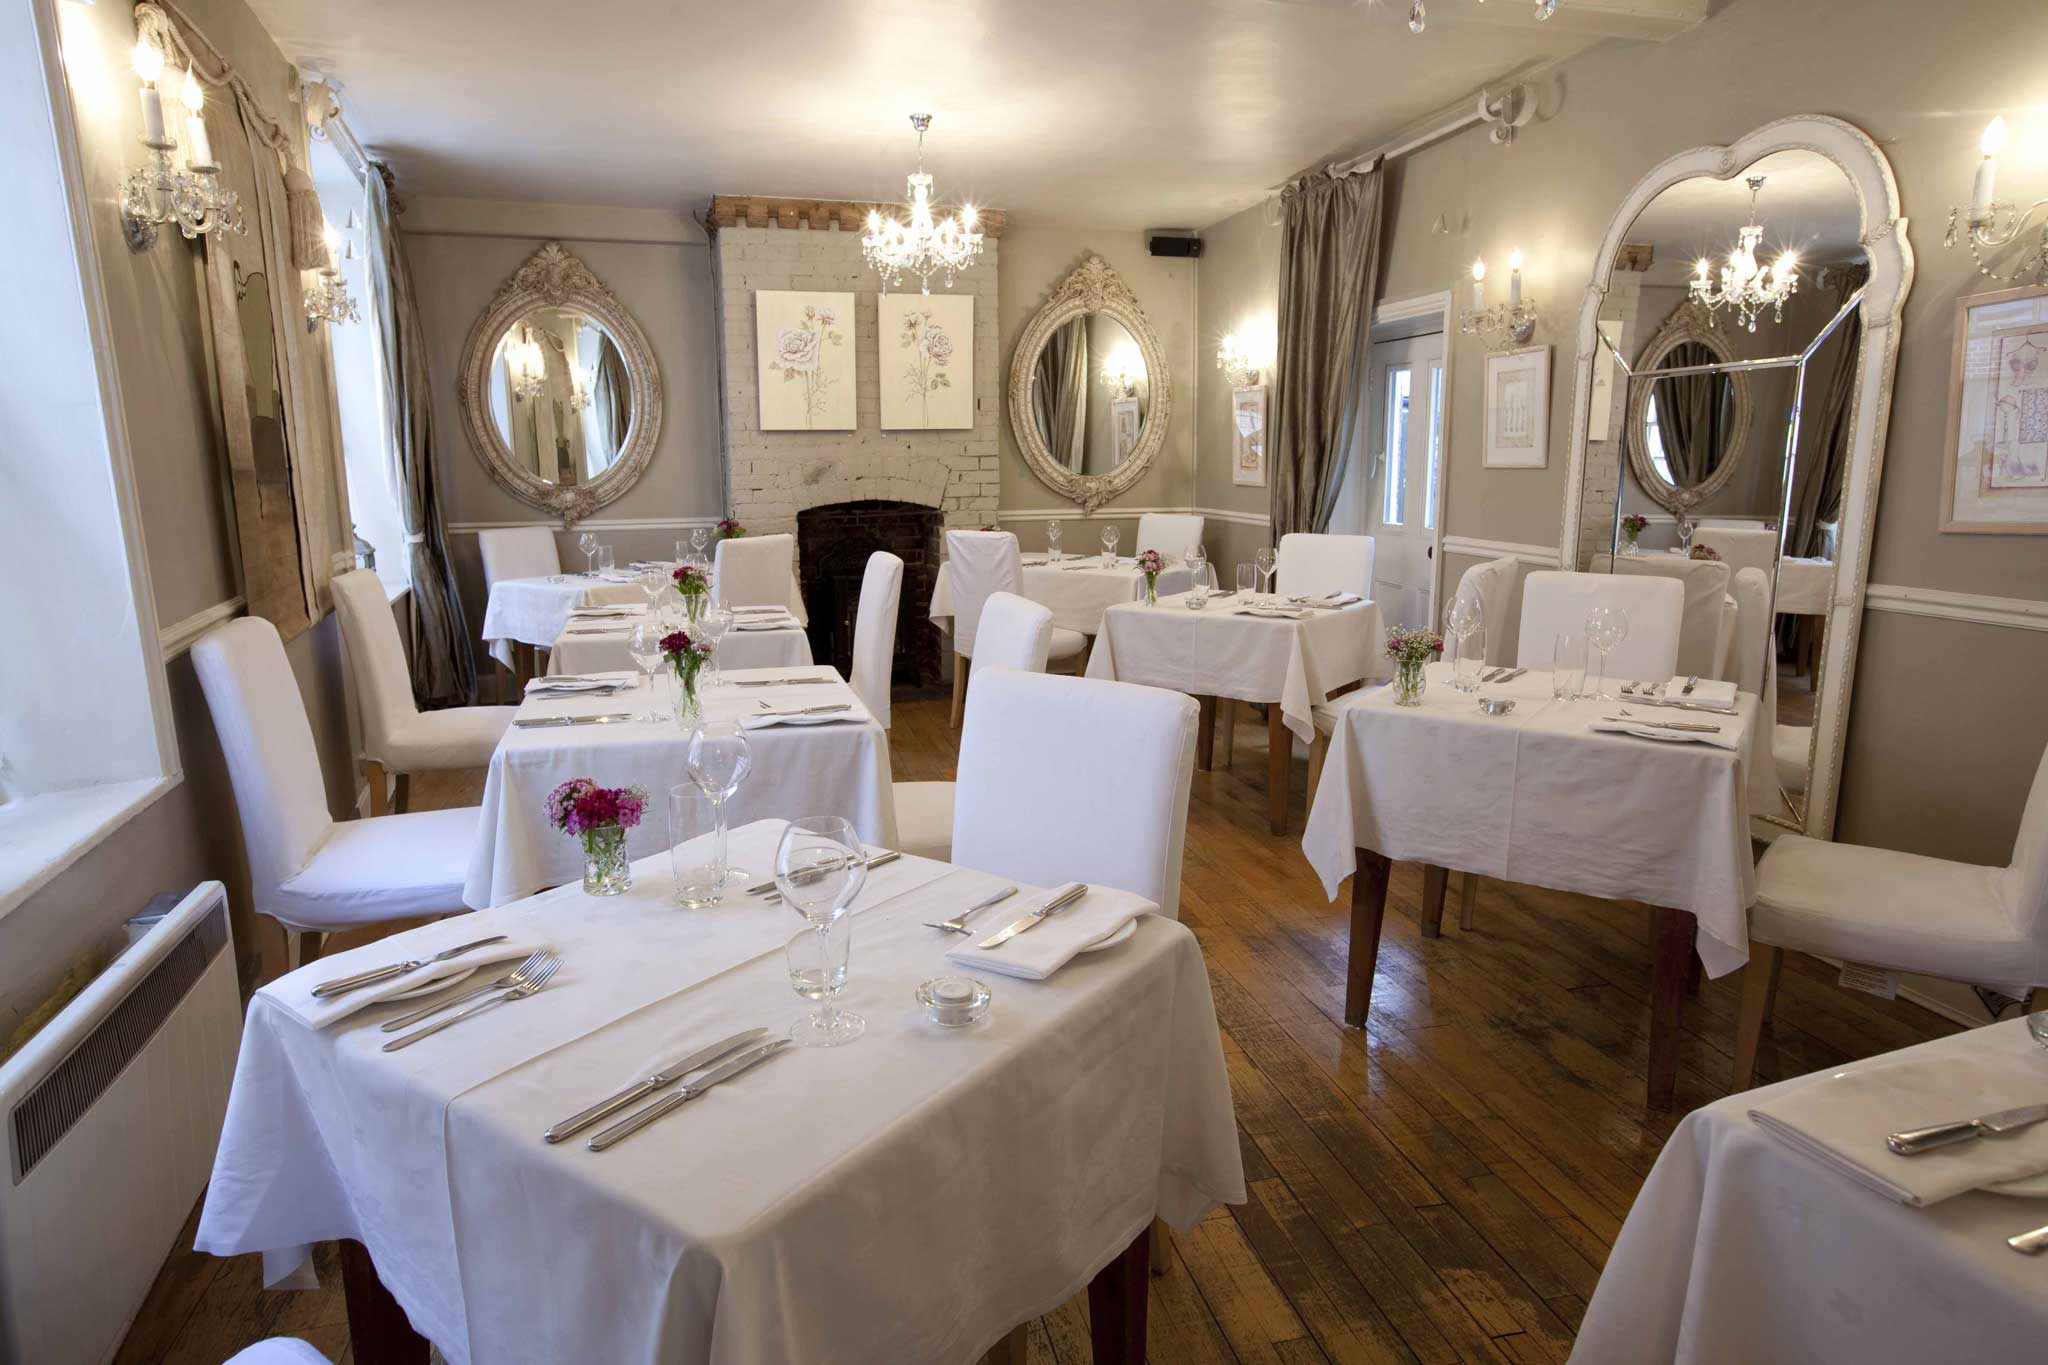 Formal dining: The restaurant's quaint dining room is small but not cramped